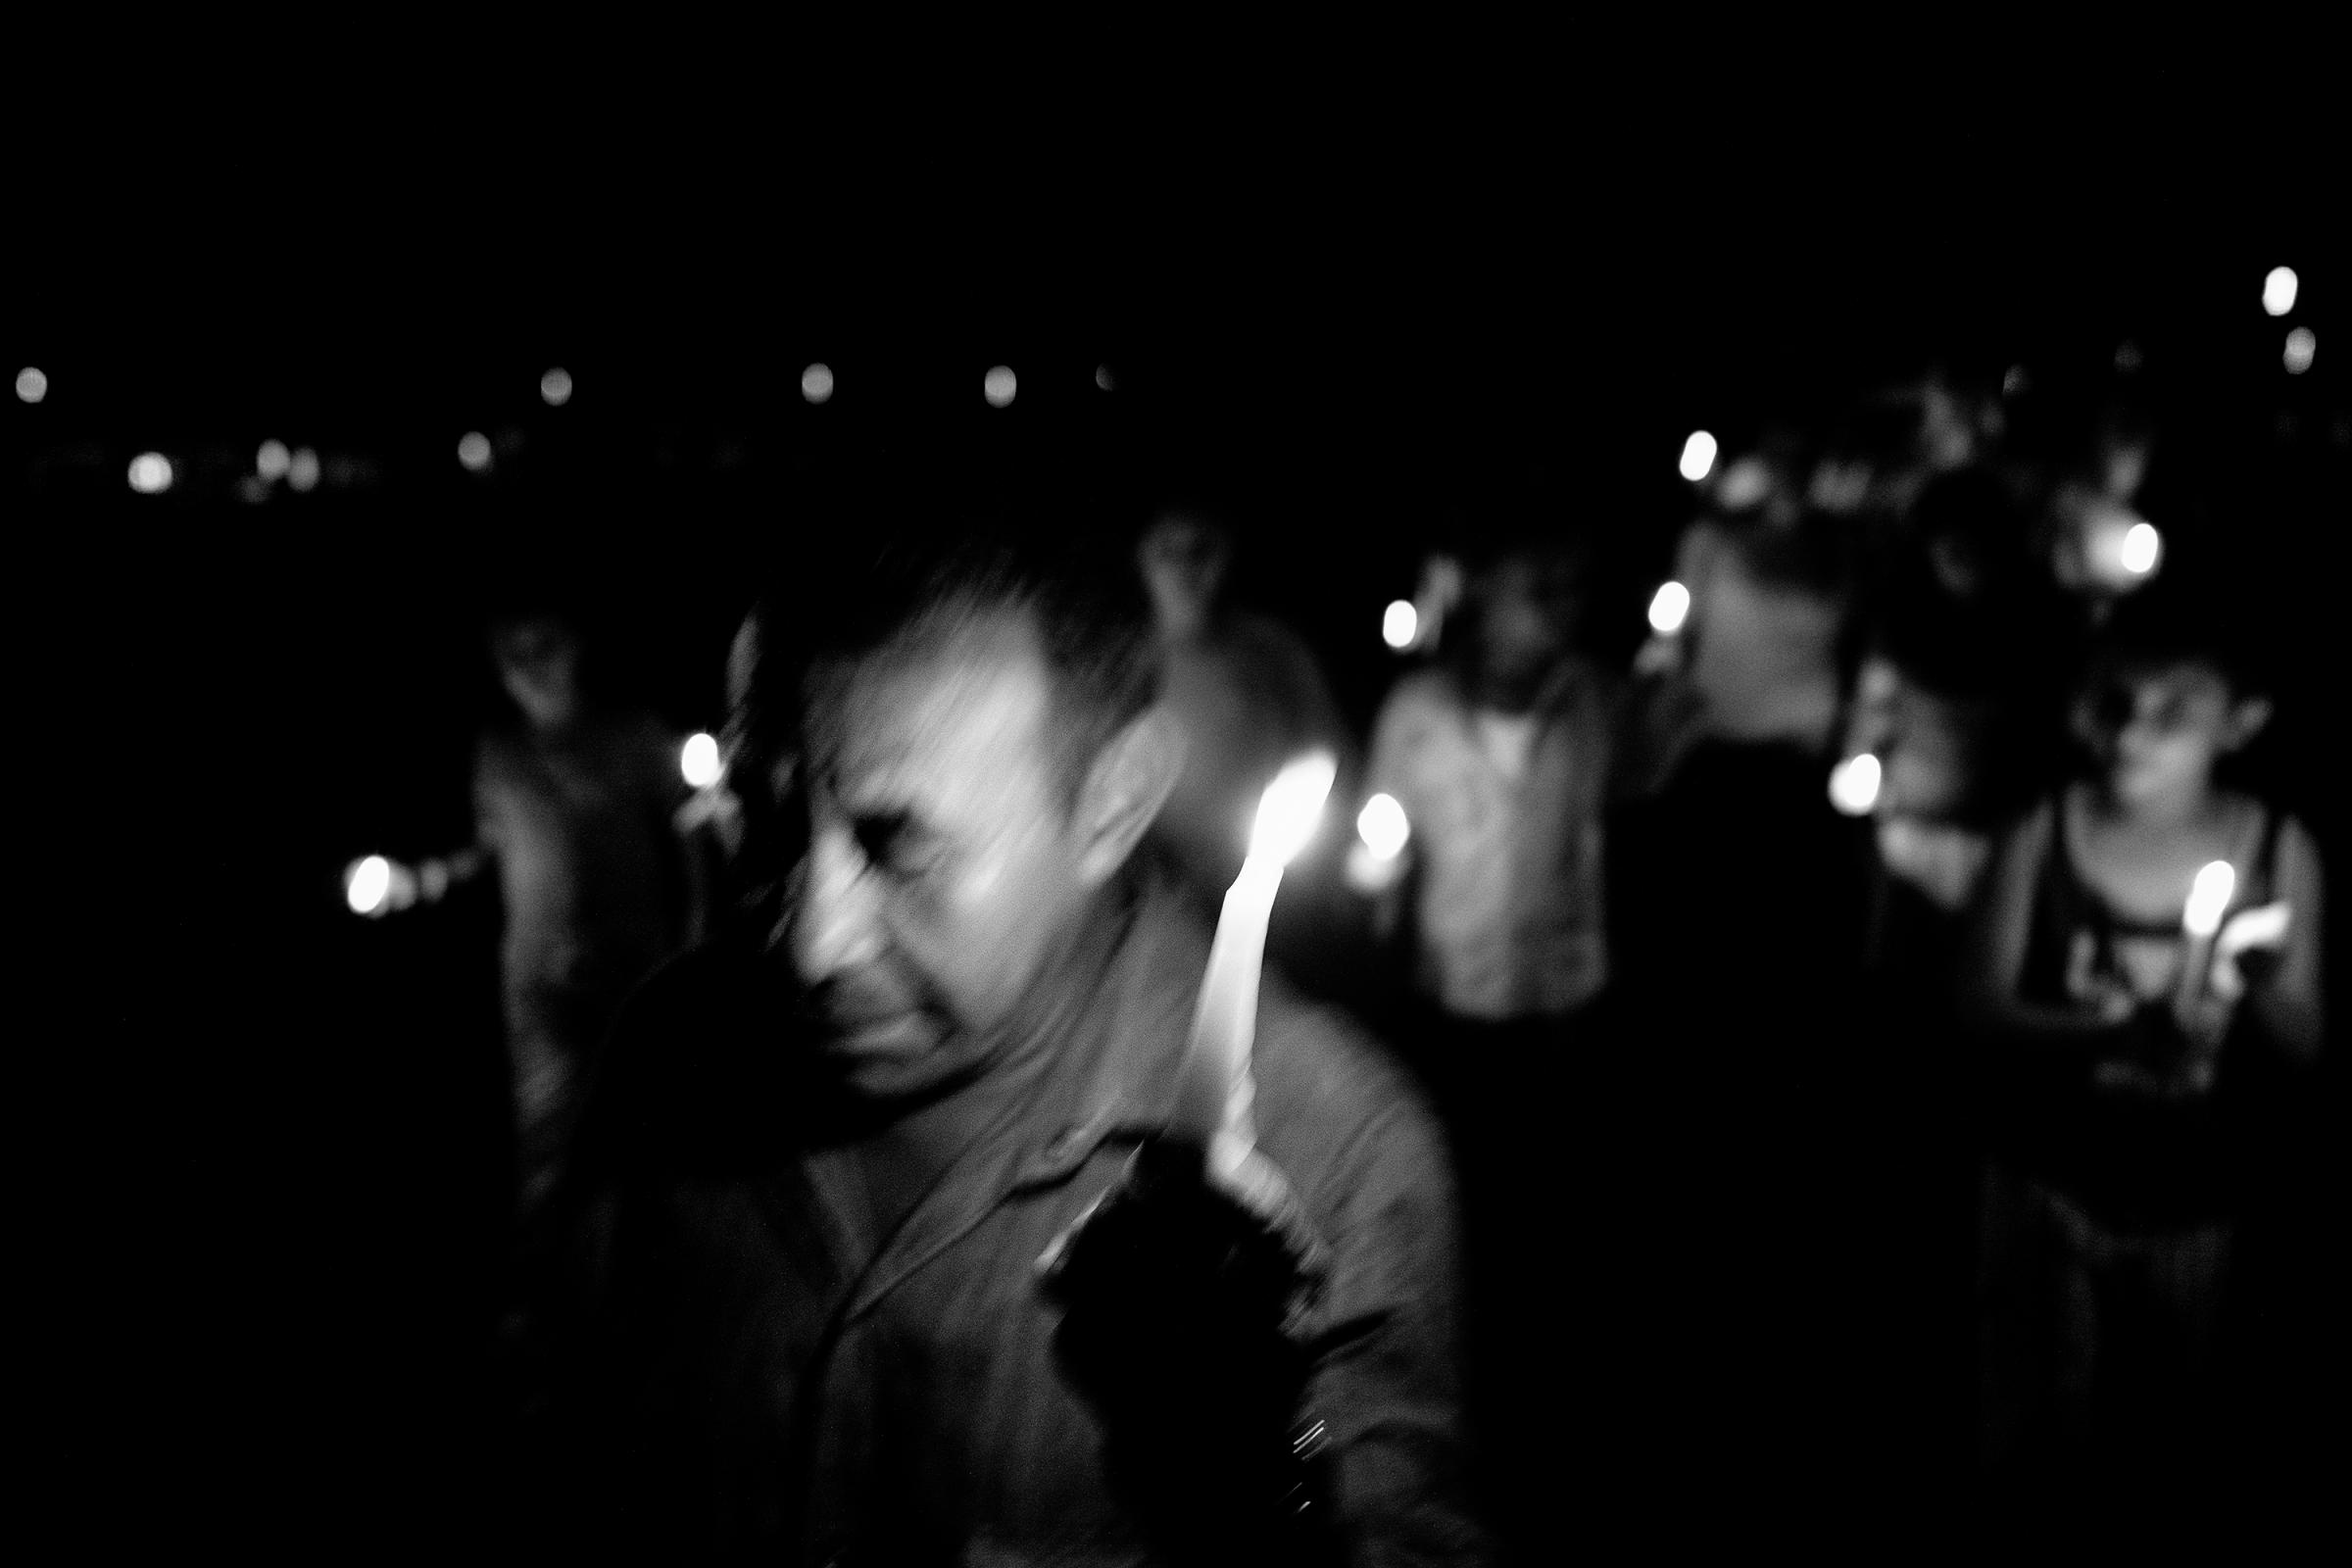 Holding candles, members of the community from Re- moiinos del Caguan attend a vigil for peace. Since the unilateral ceasefire announcement of the FARC, there are signs of the re-emergence of paramilitary units in the region, Caqueta, Colombia, April 2016.